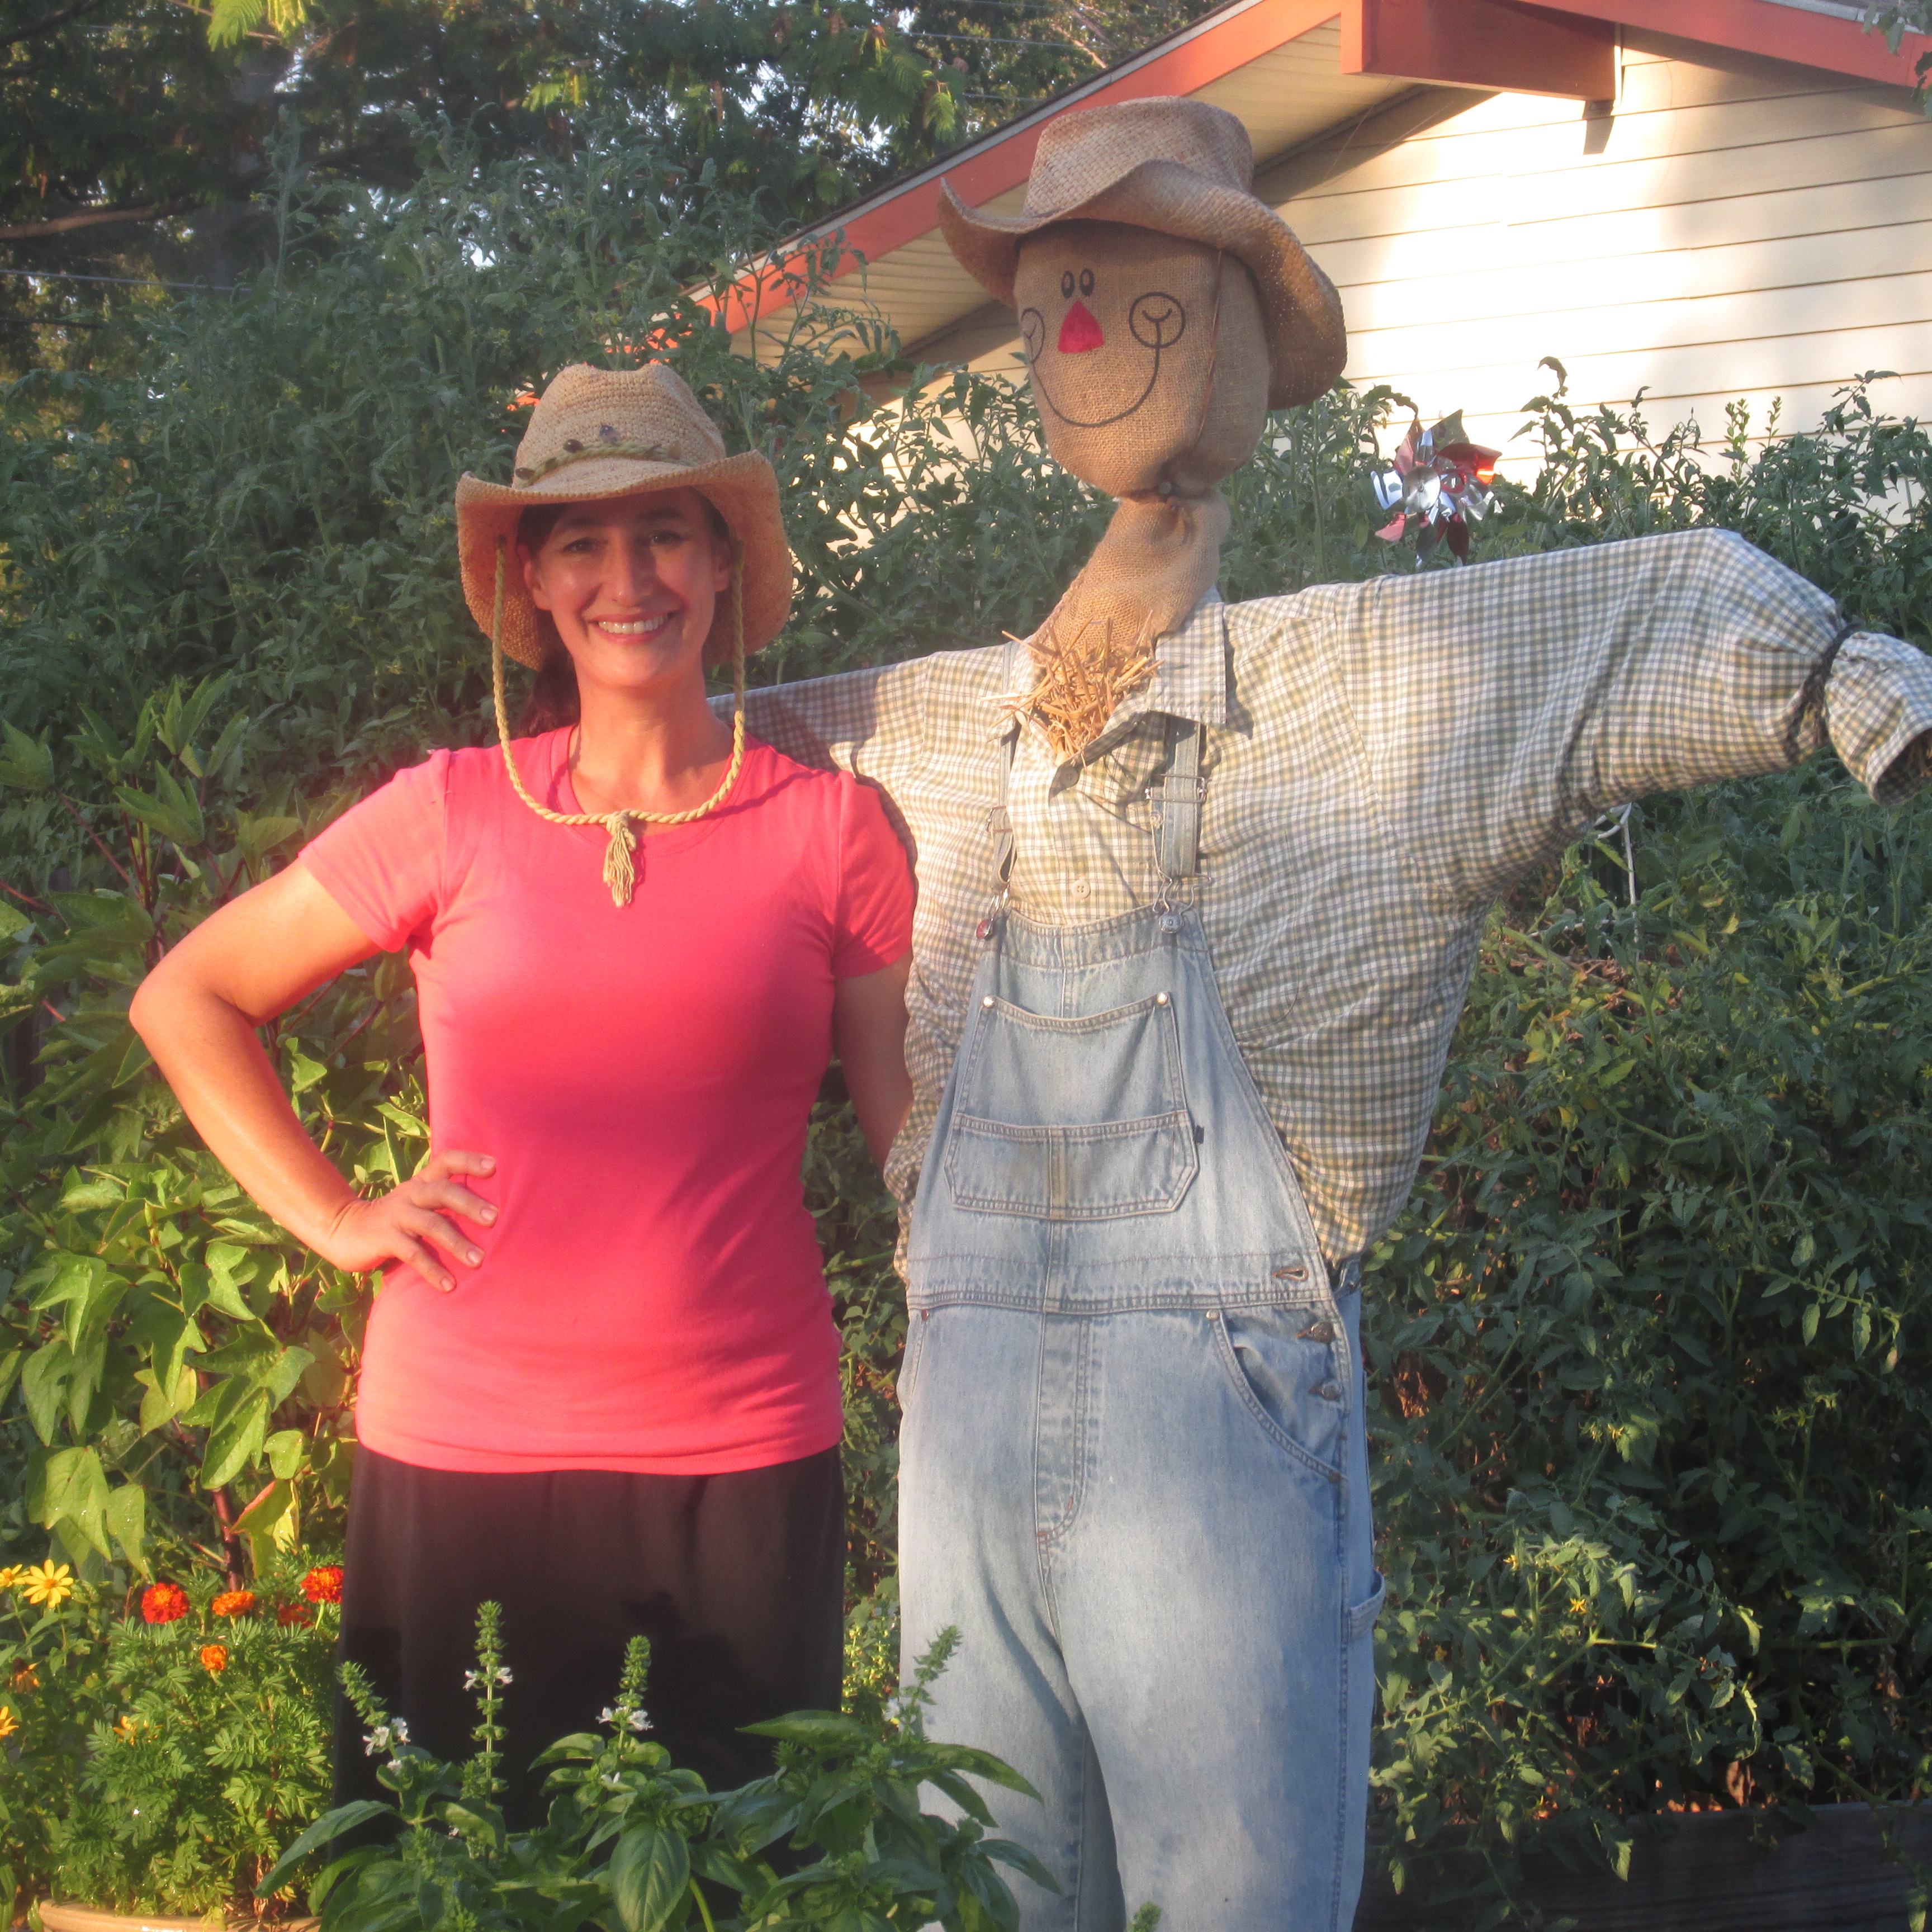 We have a new man in the garden; The Scarecrow